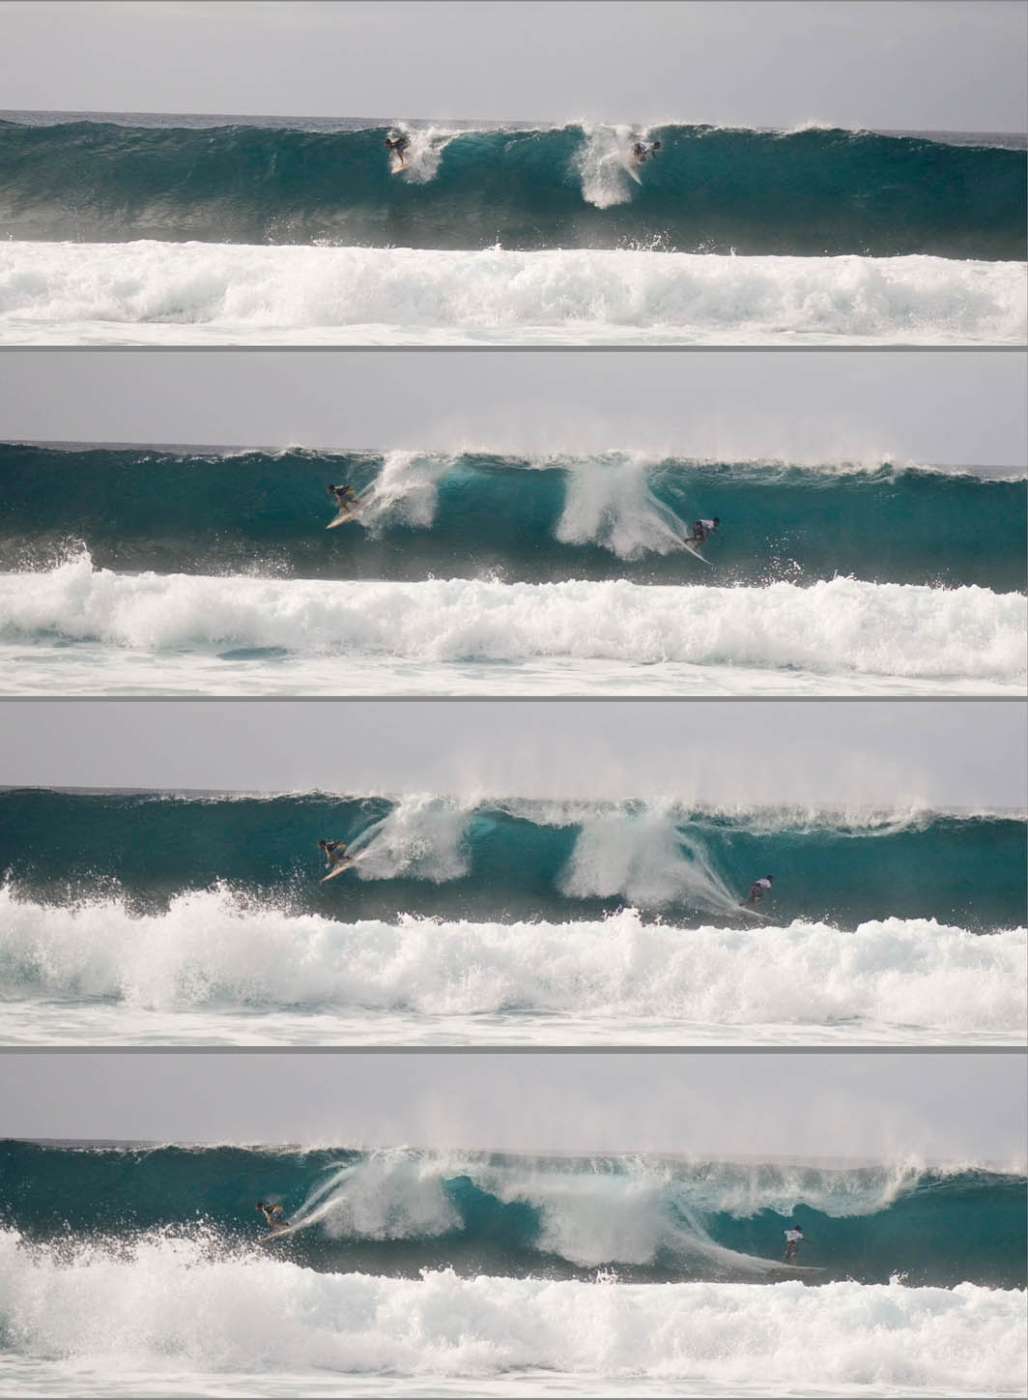 Oahu Pipeline Pro 2014 Hawaii north shore polyptych